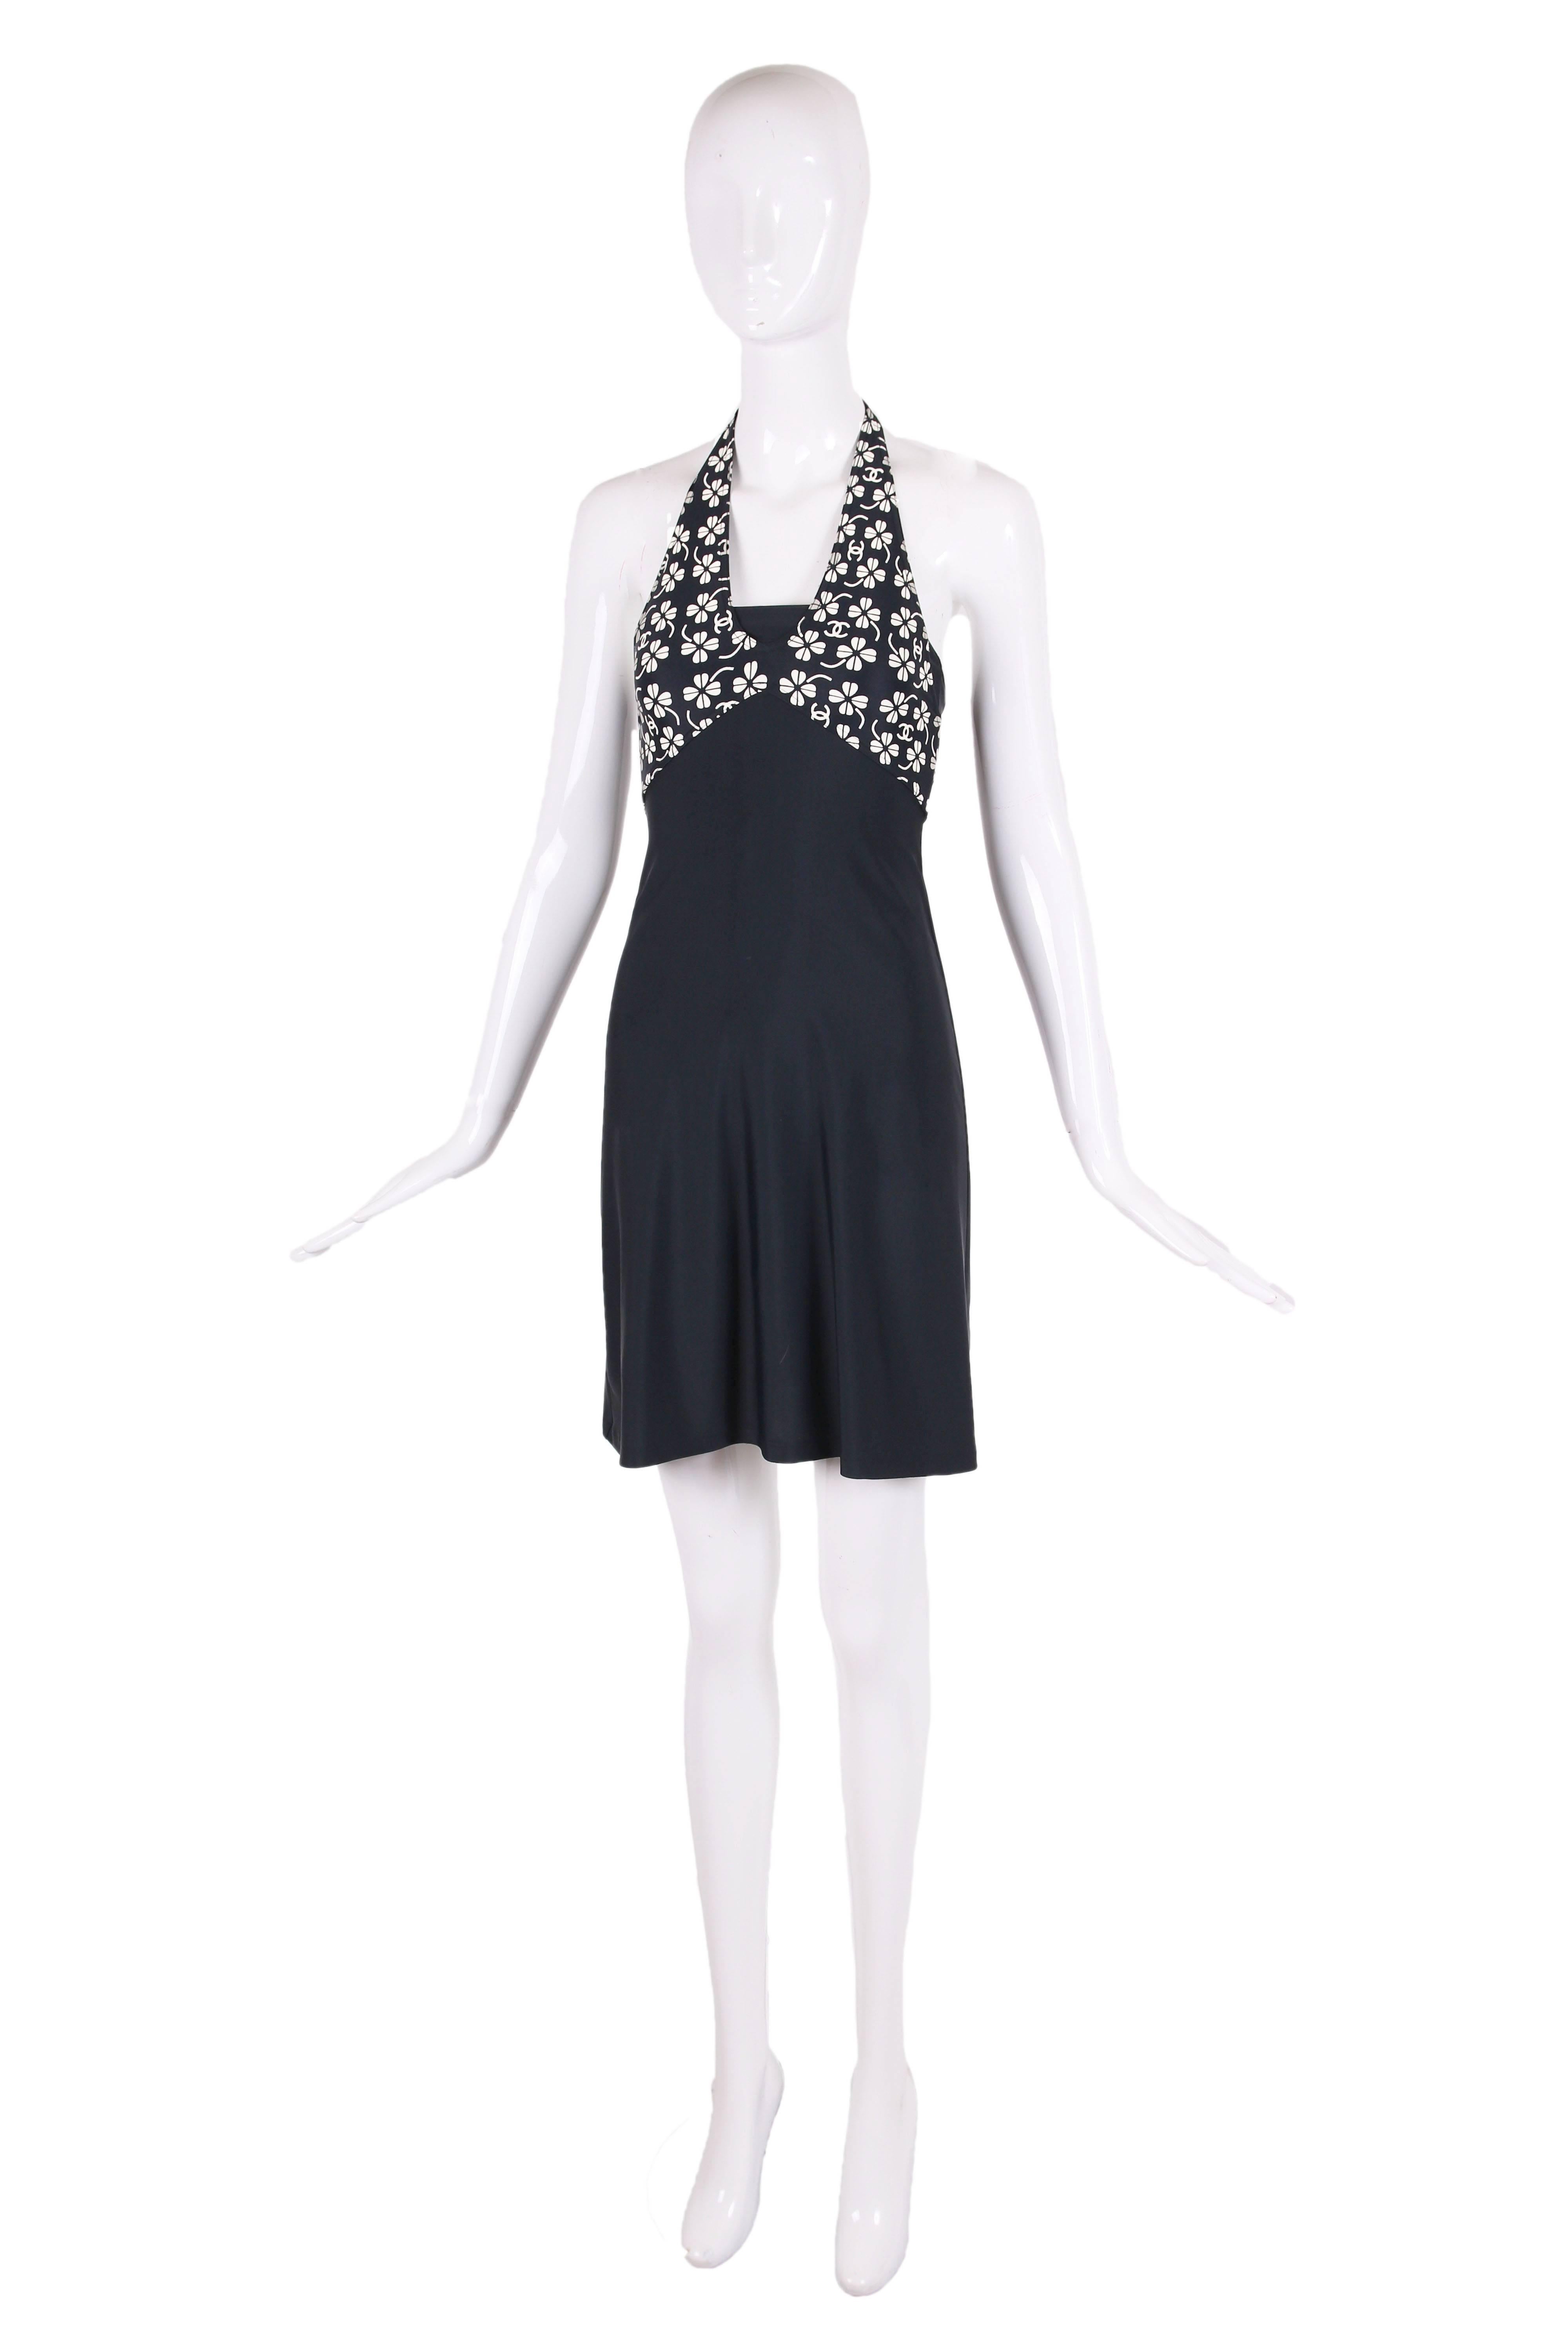 2001 Chanel navy blue nylon and spandex halter dress featuring cream-colored clover and CC logo print. The halter has an interior bandeau and a silver-toned CC logo clasp at back neck. In excellent condition. Size EU 34. 
MEASUREMENTS:
Bust -